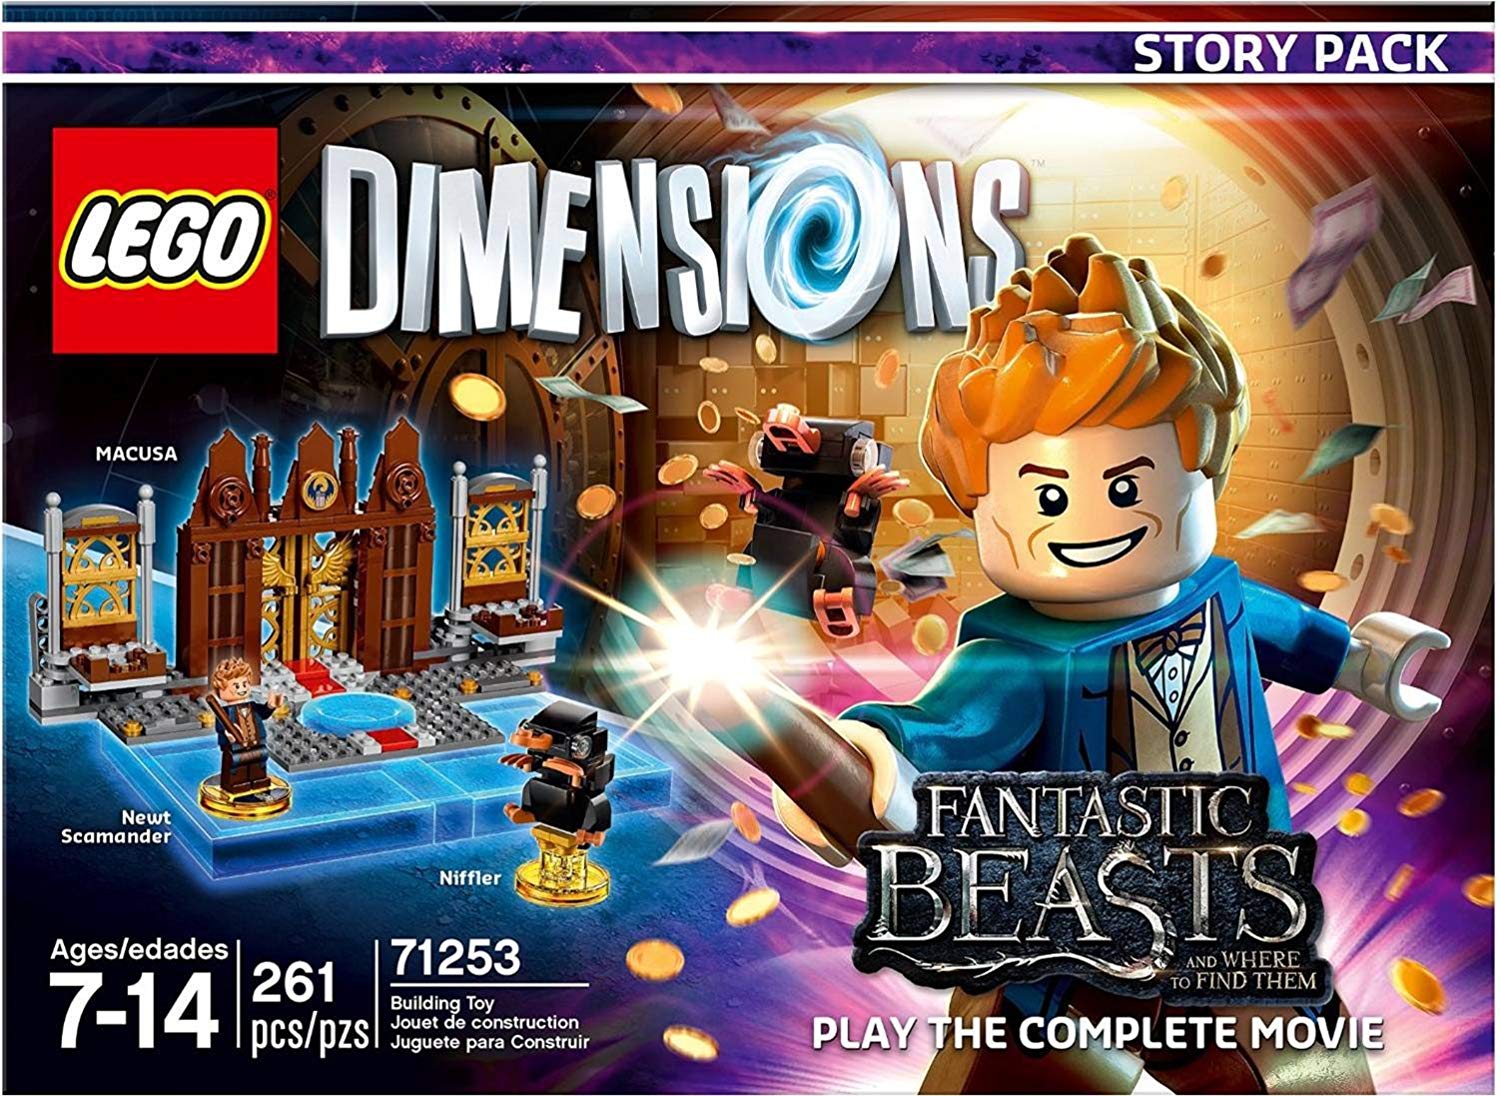 Lego Dimensions Fantastic Beasts and Where to Find Them Story Pack (71253)